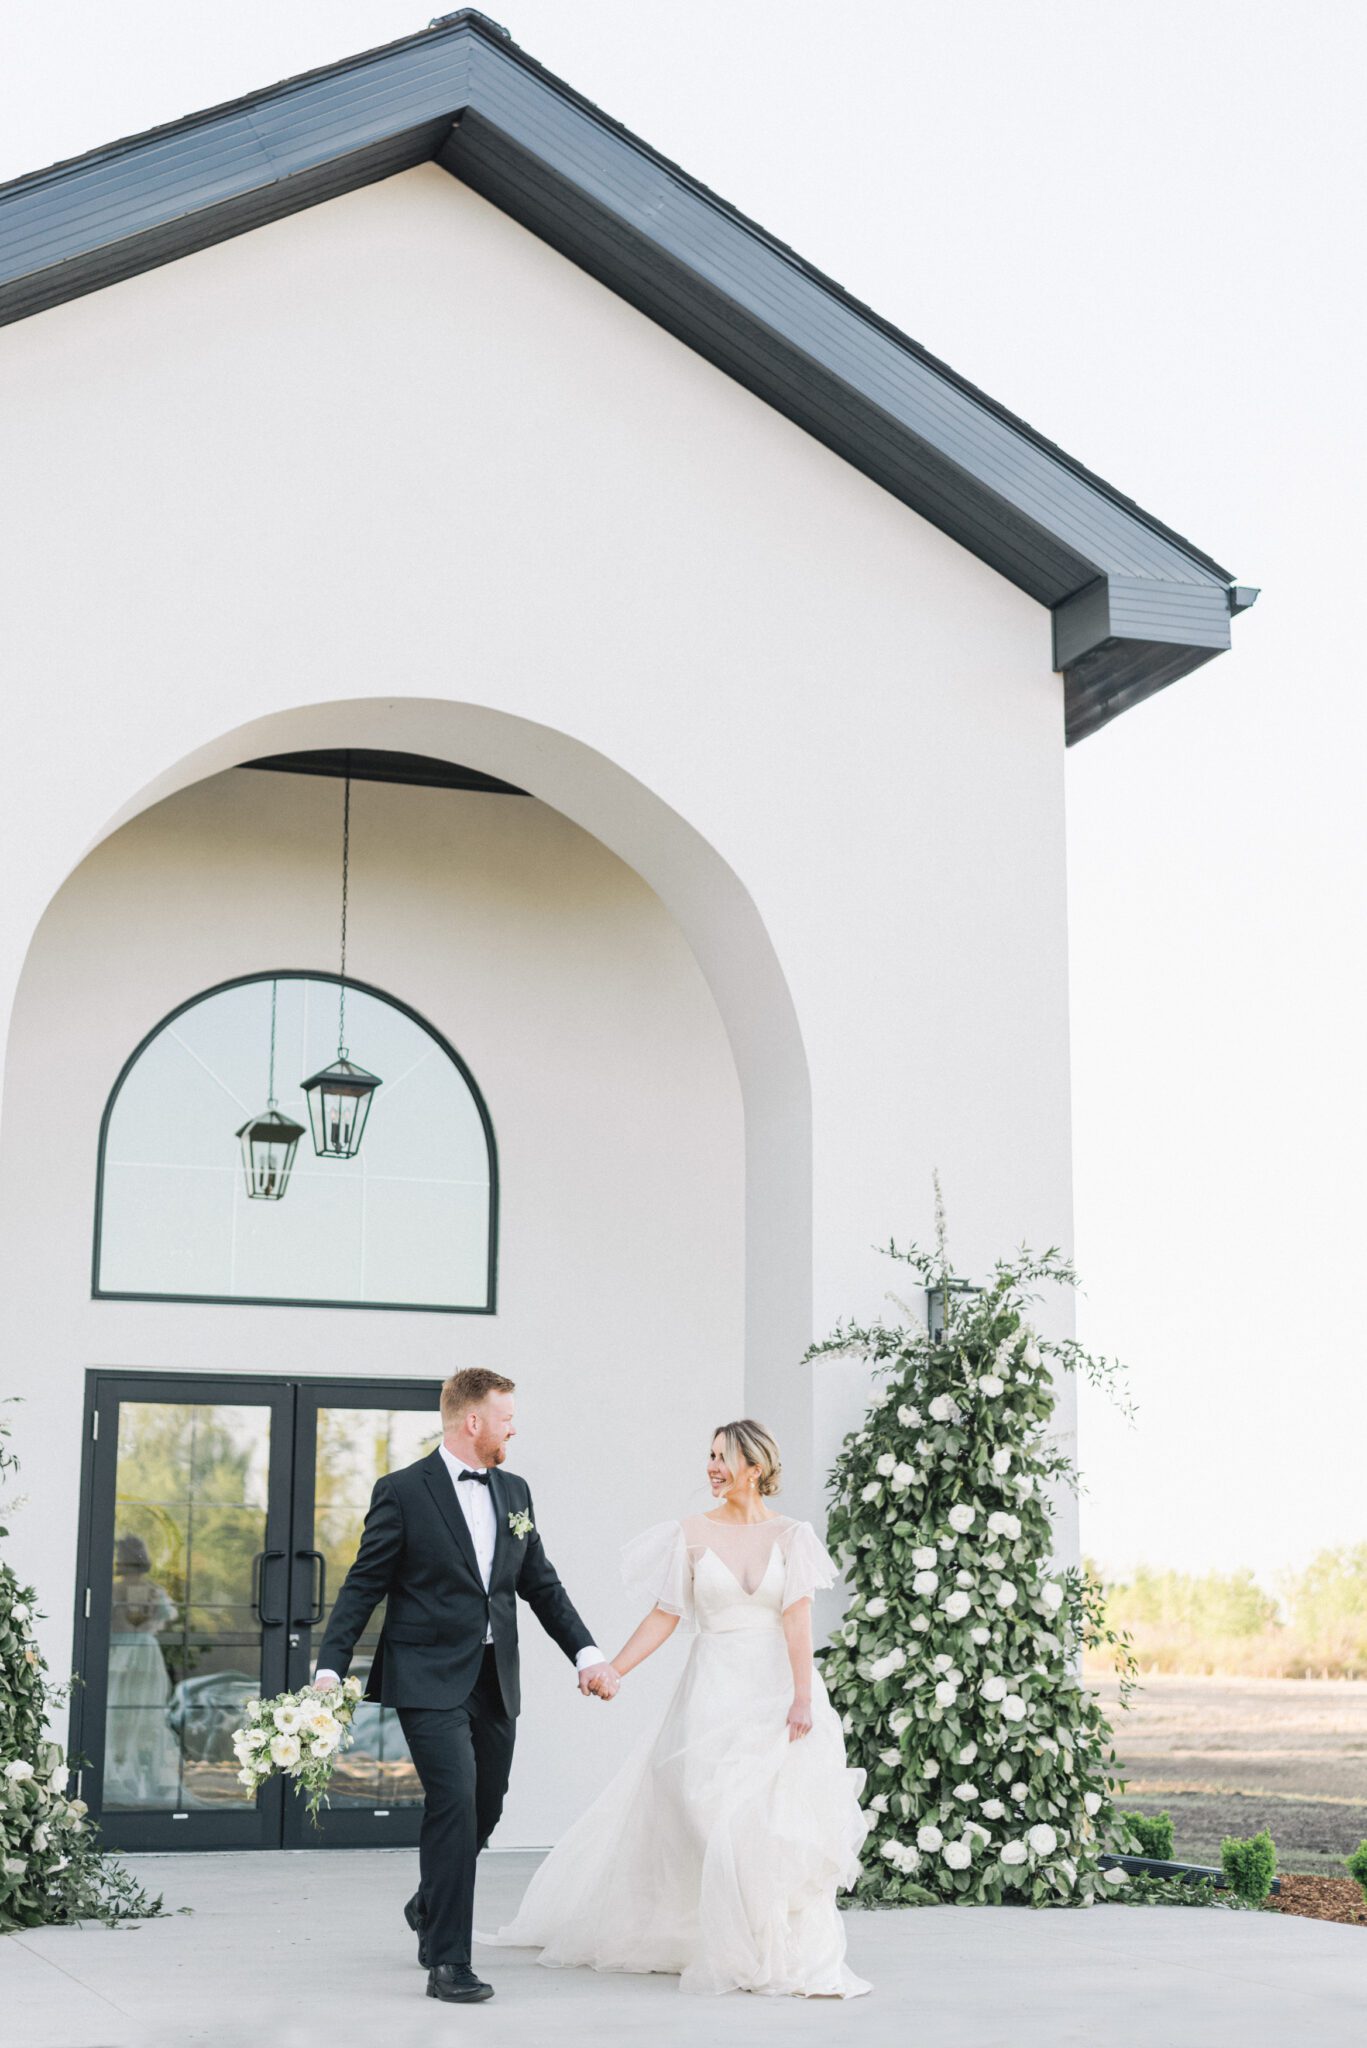 Bride and groom embracing in front of Sparrow Lane in Edmonton, Alberta during fine art summer wedding. Pale yellow, ivory, white and green cottage core inspired wedding inspiration. Bride wearing whimsical yet sophisticated bridal gown.